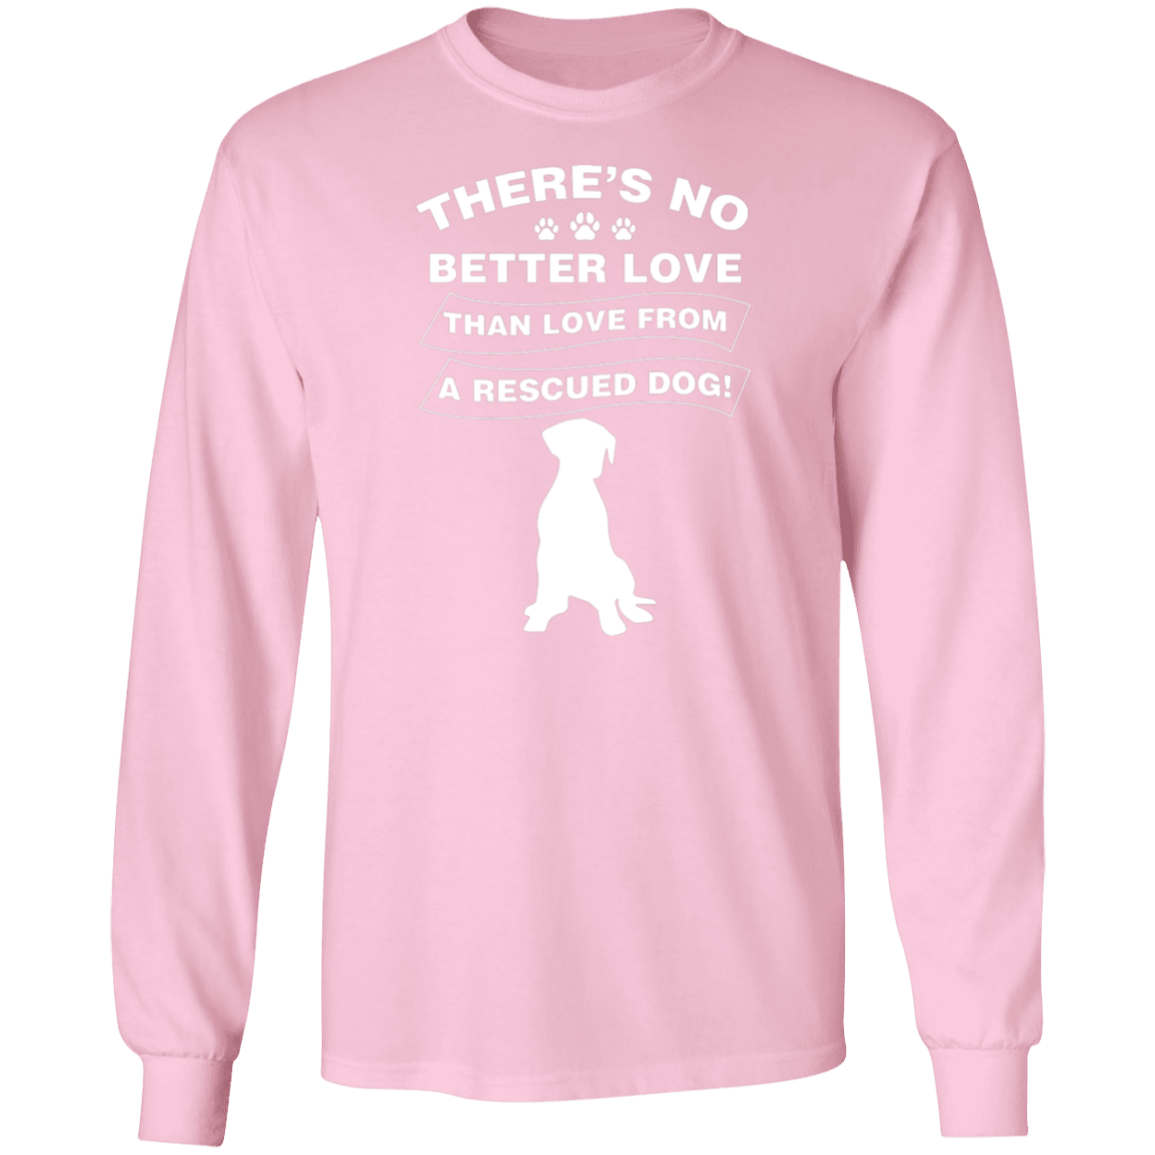 There's No Better Love - Long Sleeve T Shirt.